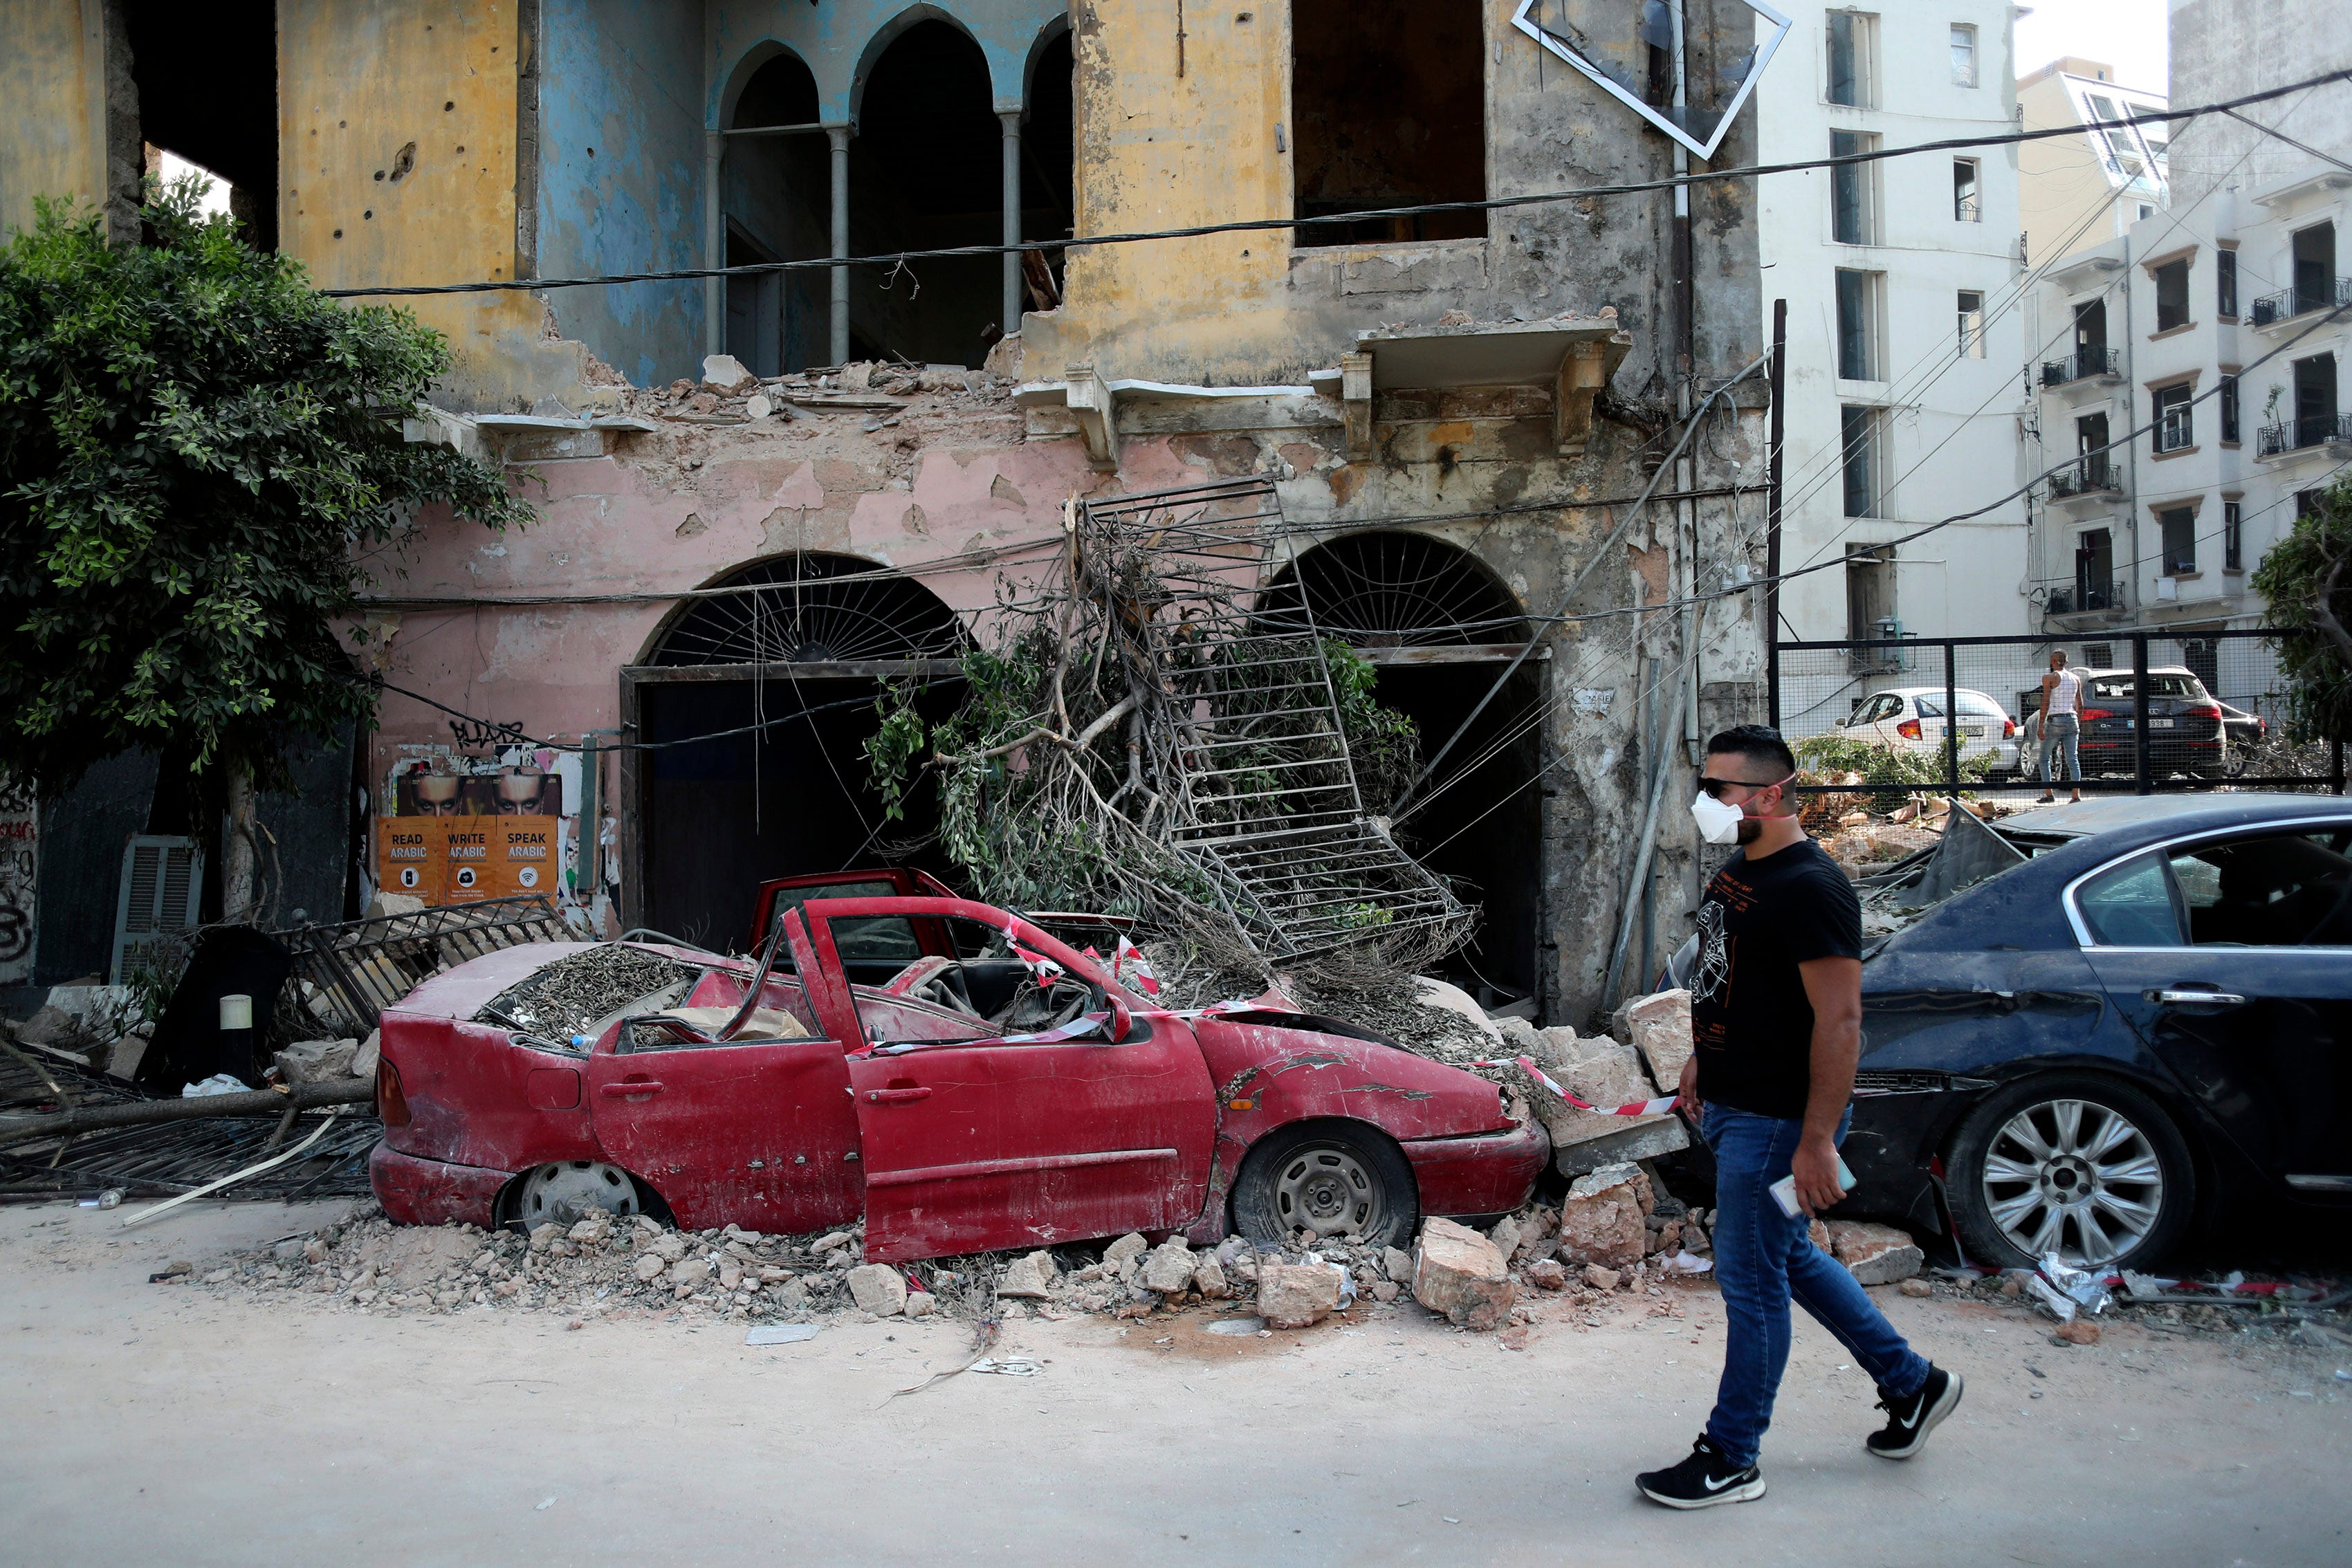 A man walks past a destroyed car at a neighborhood near the scene of Tuesday's explosion that hit the seaport of Beirut, Lebanon, Friday, Aug. 7, 2020. Rescue teams were still searching the rubble of Beirut's port for bodies on Friday, nearly three days after a massive explosion sent a wave of destruction through Lebanon's capital.